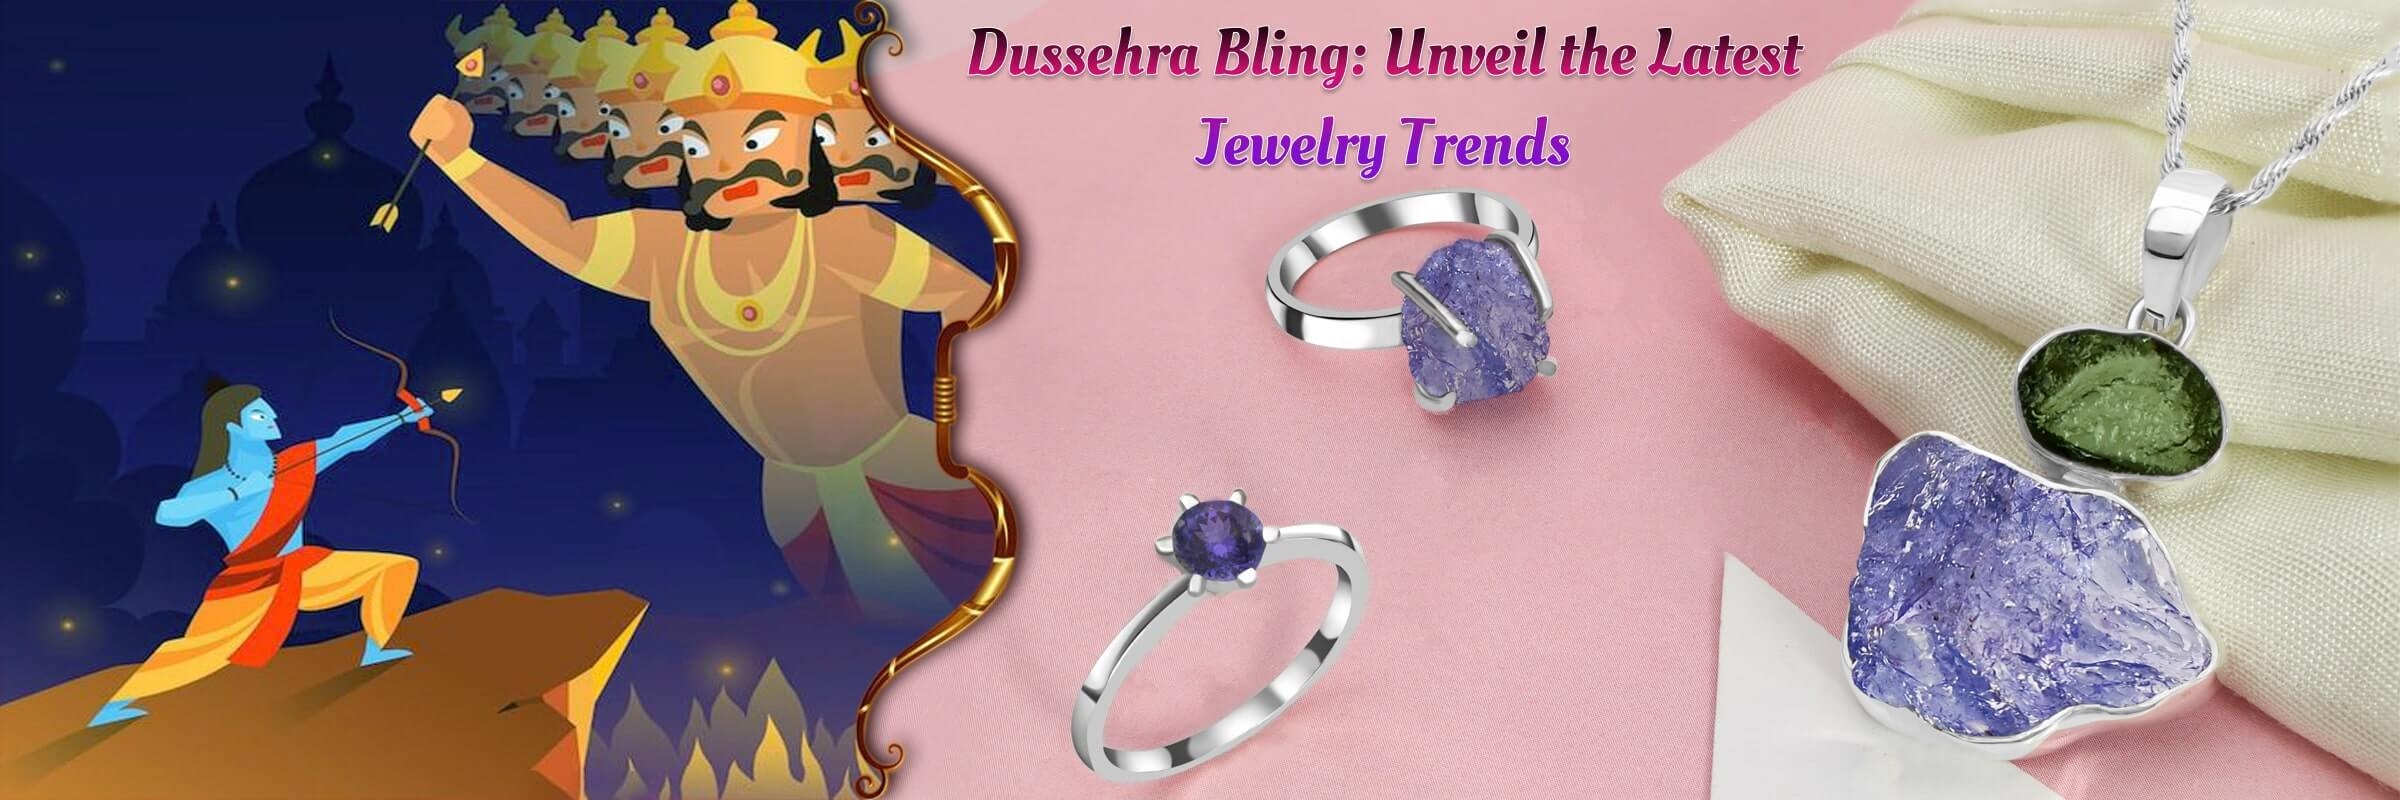 Silver Jewellery Trends For Dussehra